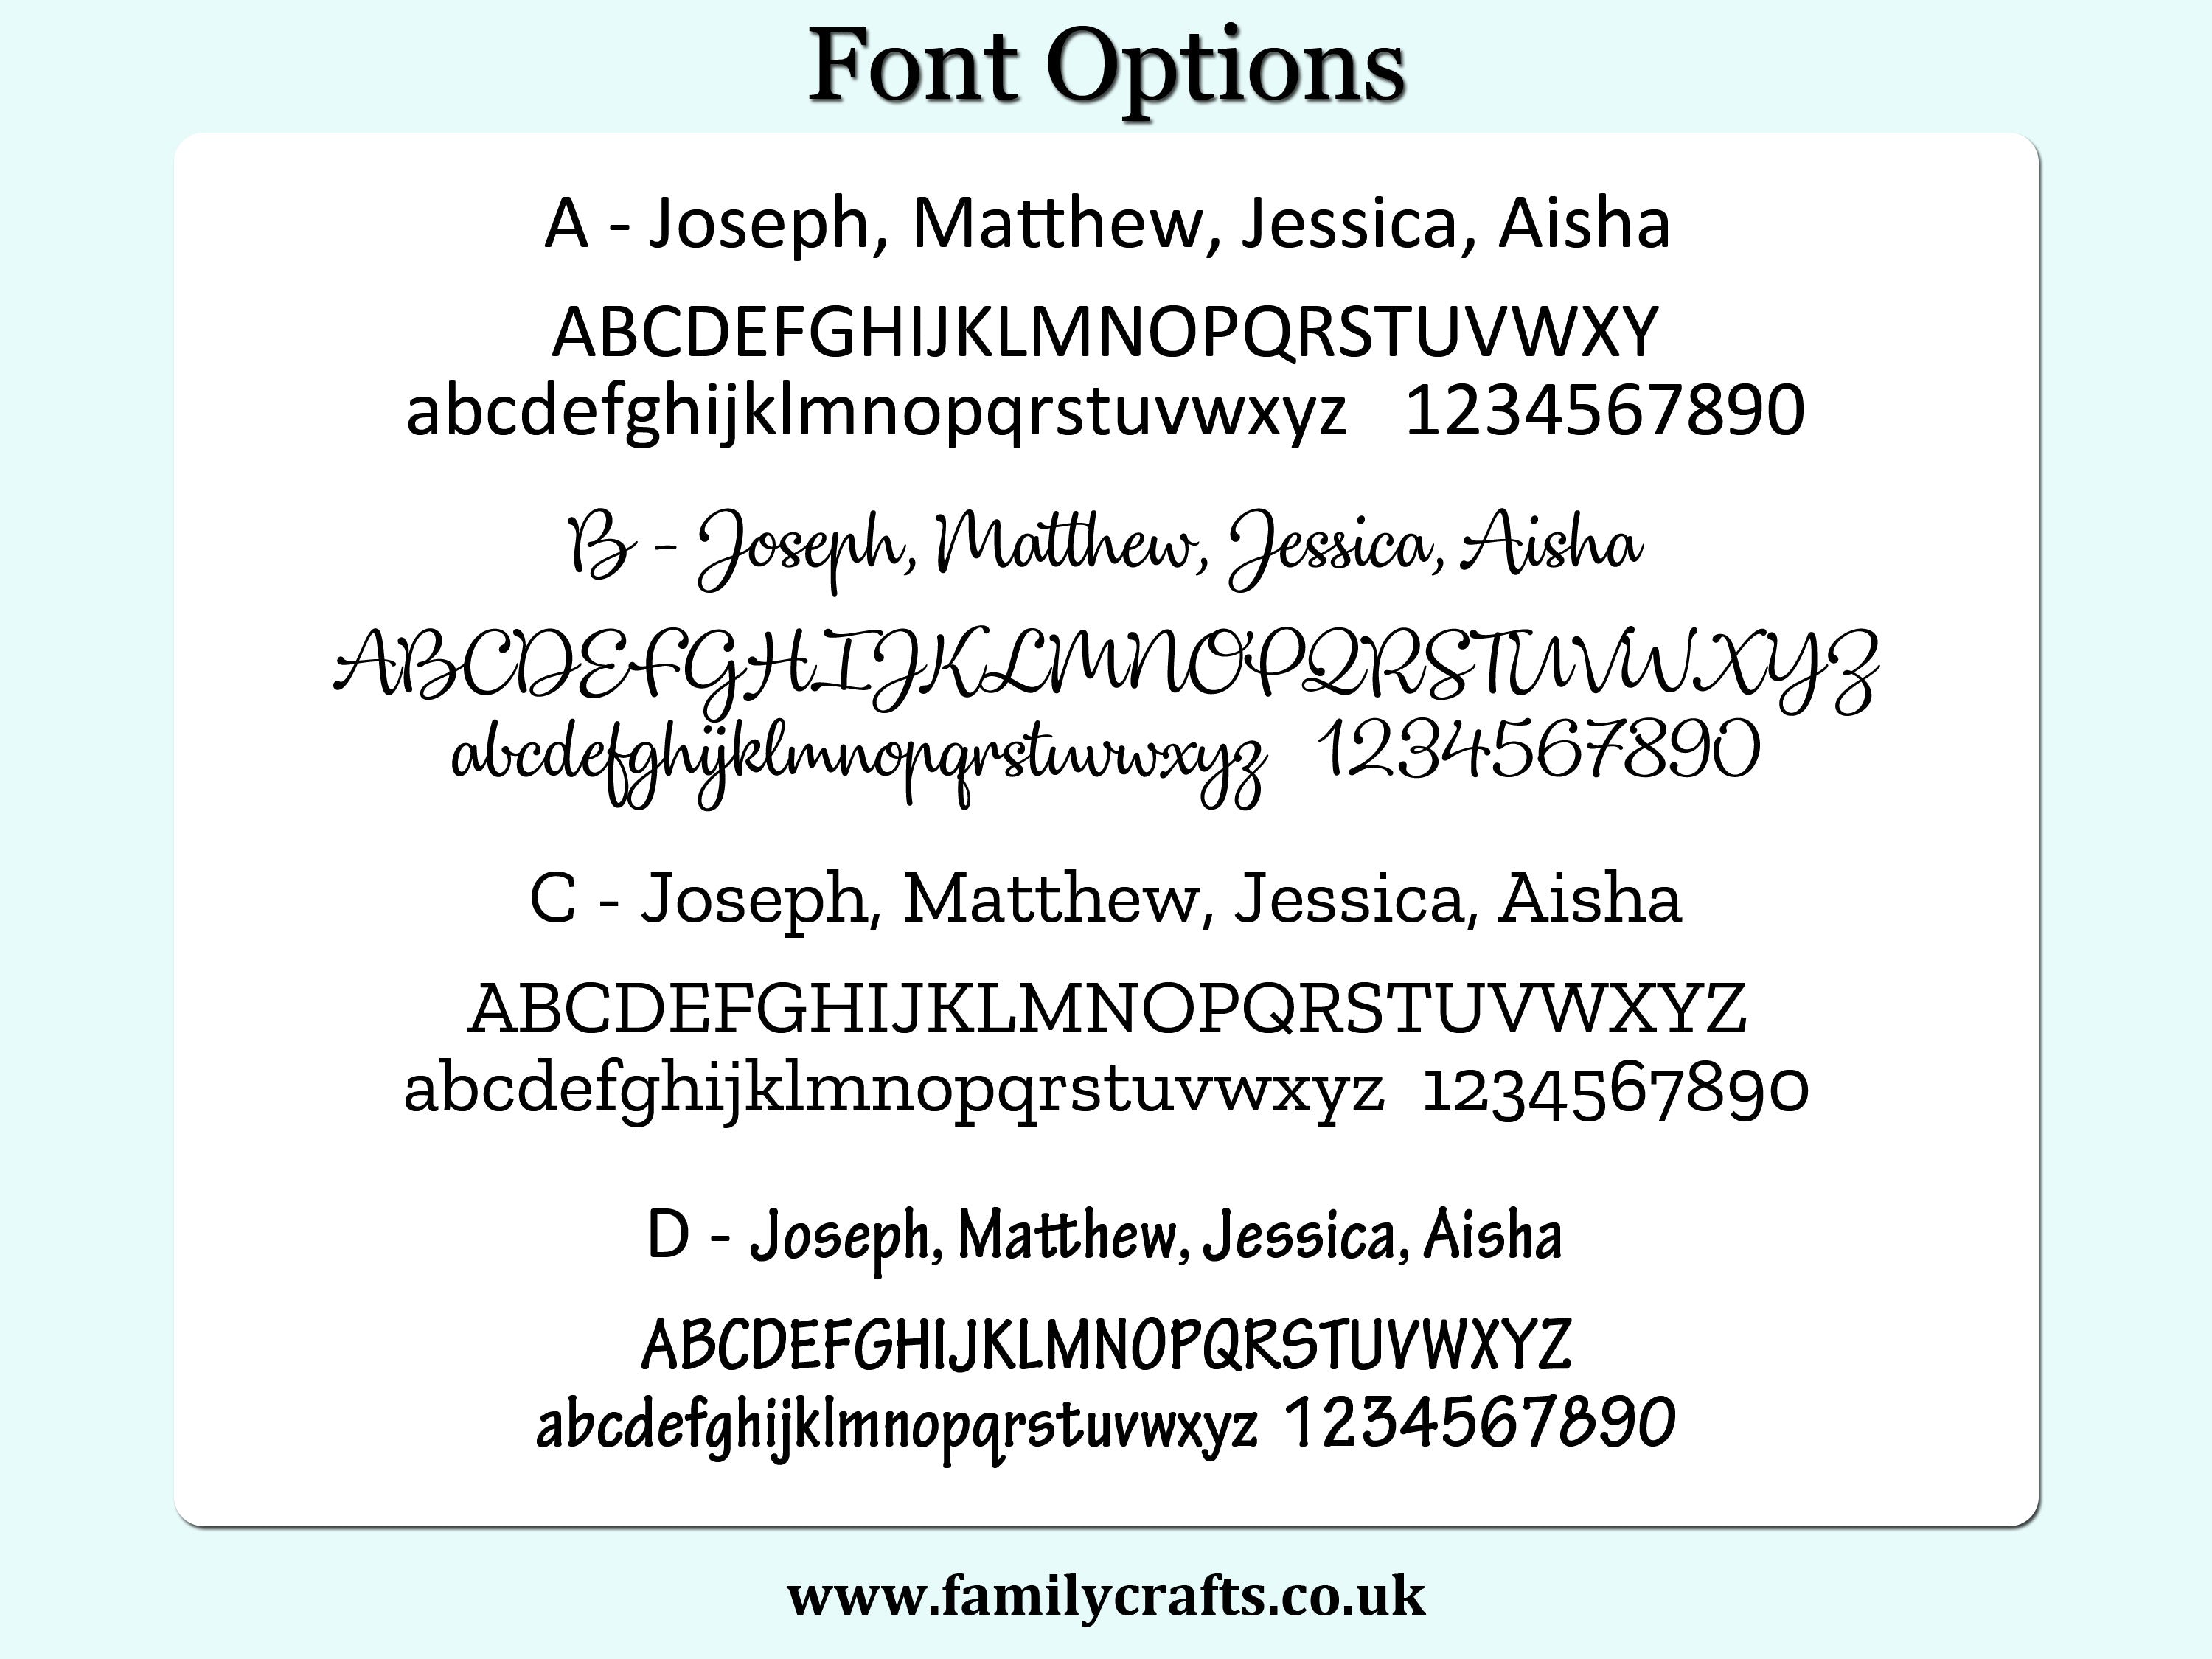 Font Options for Personalised Engraving